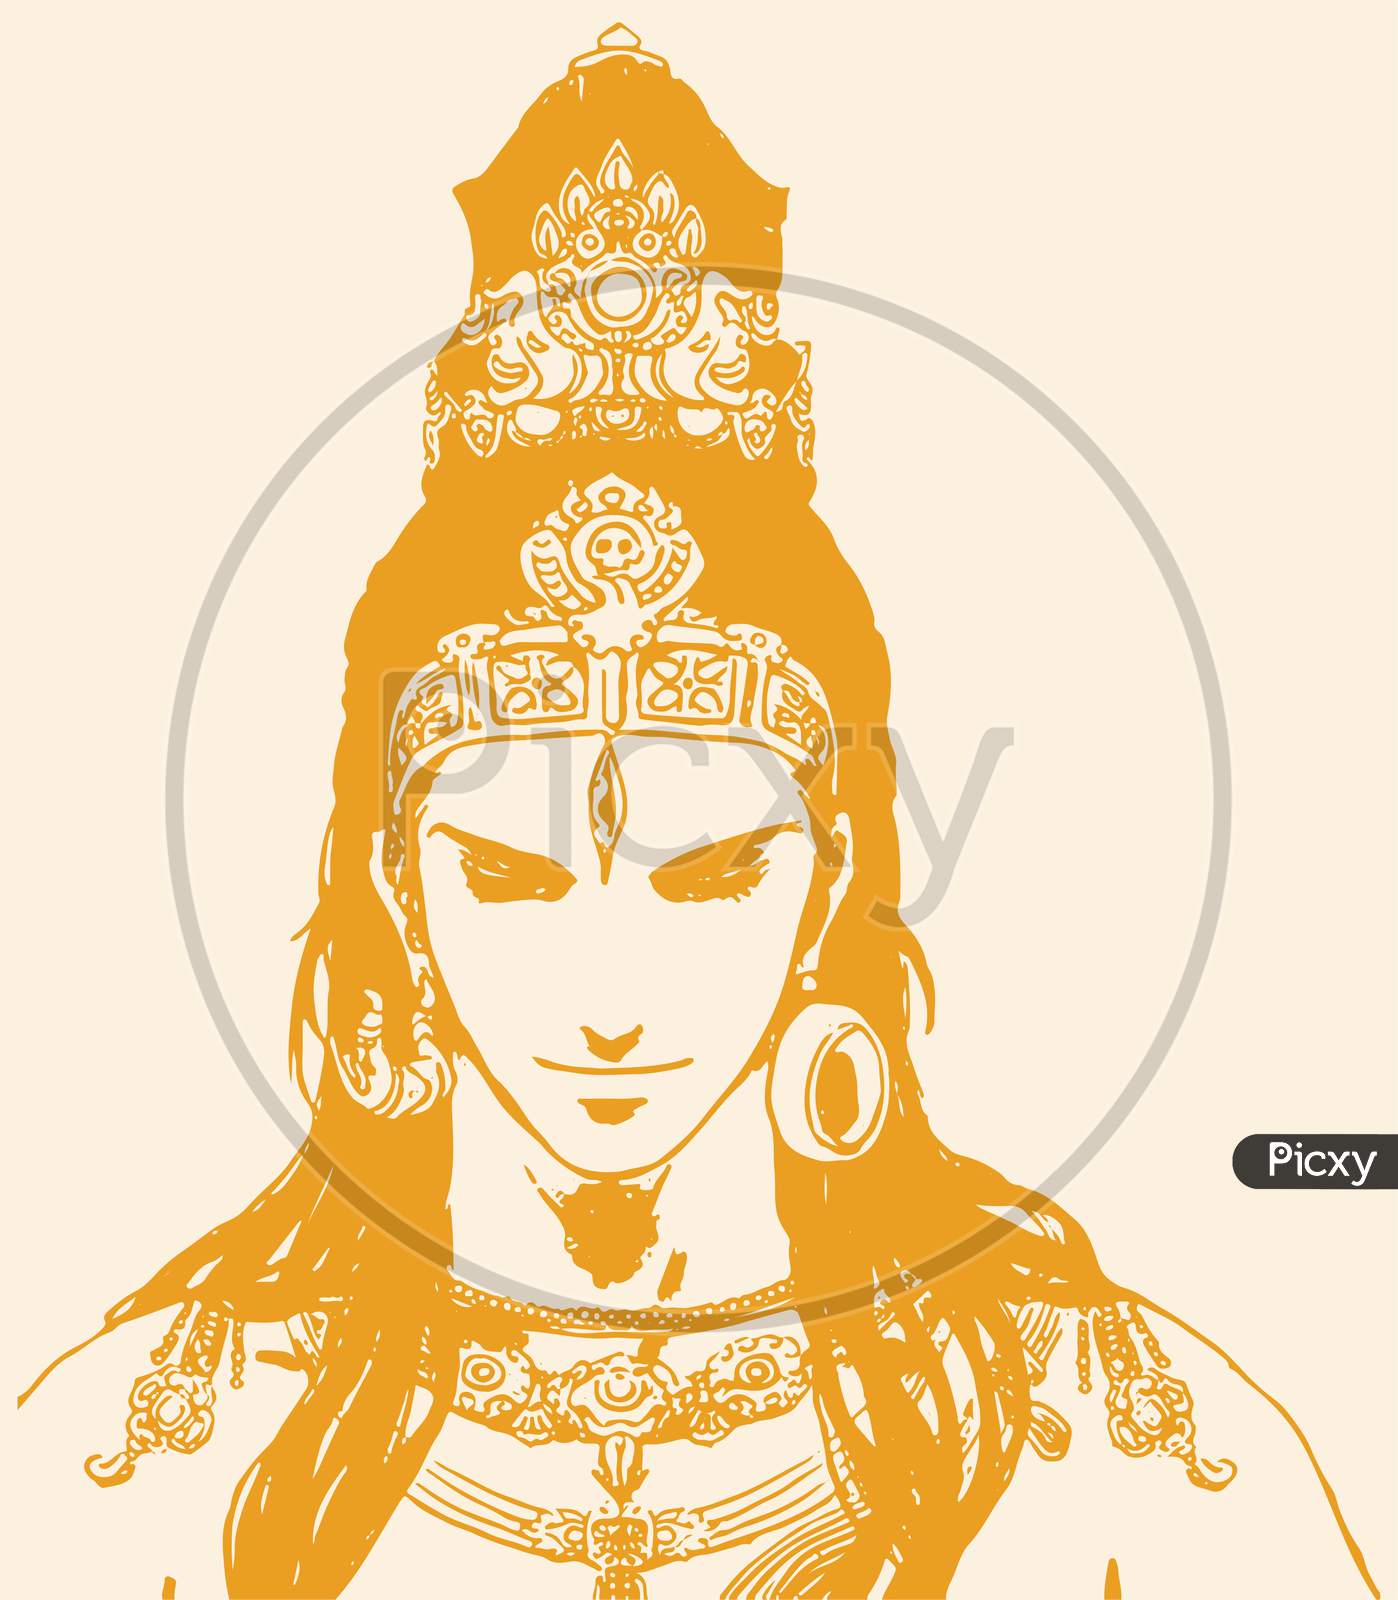 How to draw a sketch of Lord Shiva | Lord Shiva drawing step by step -  YouTube